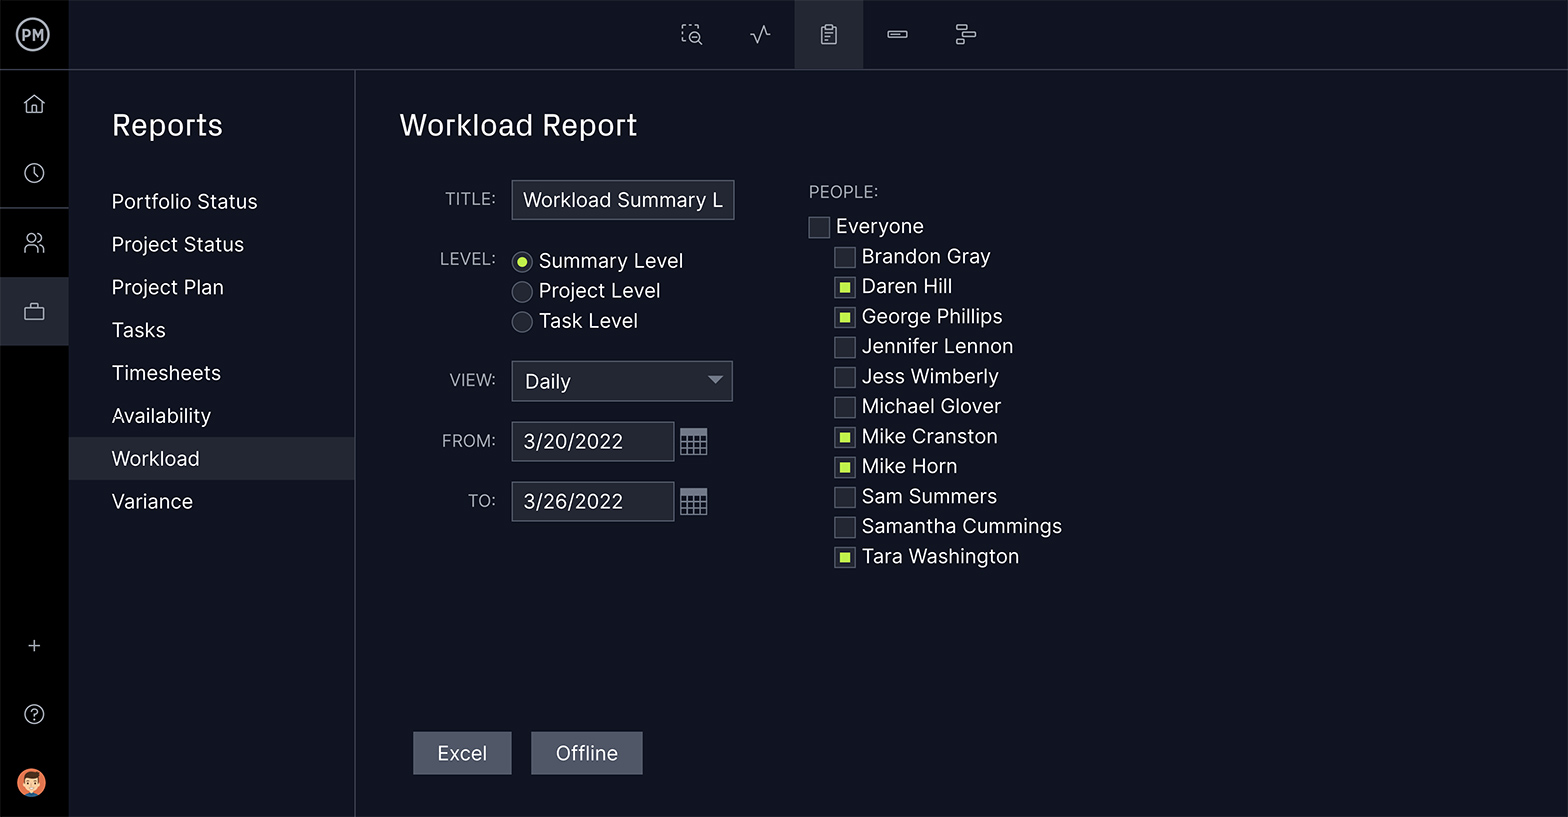 Project reporting software showing workload information